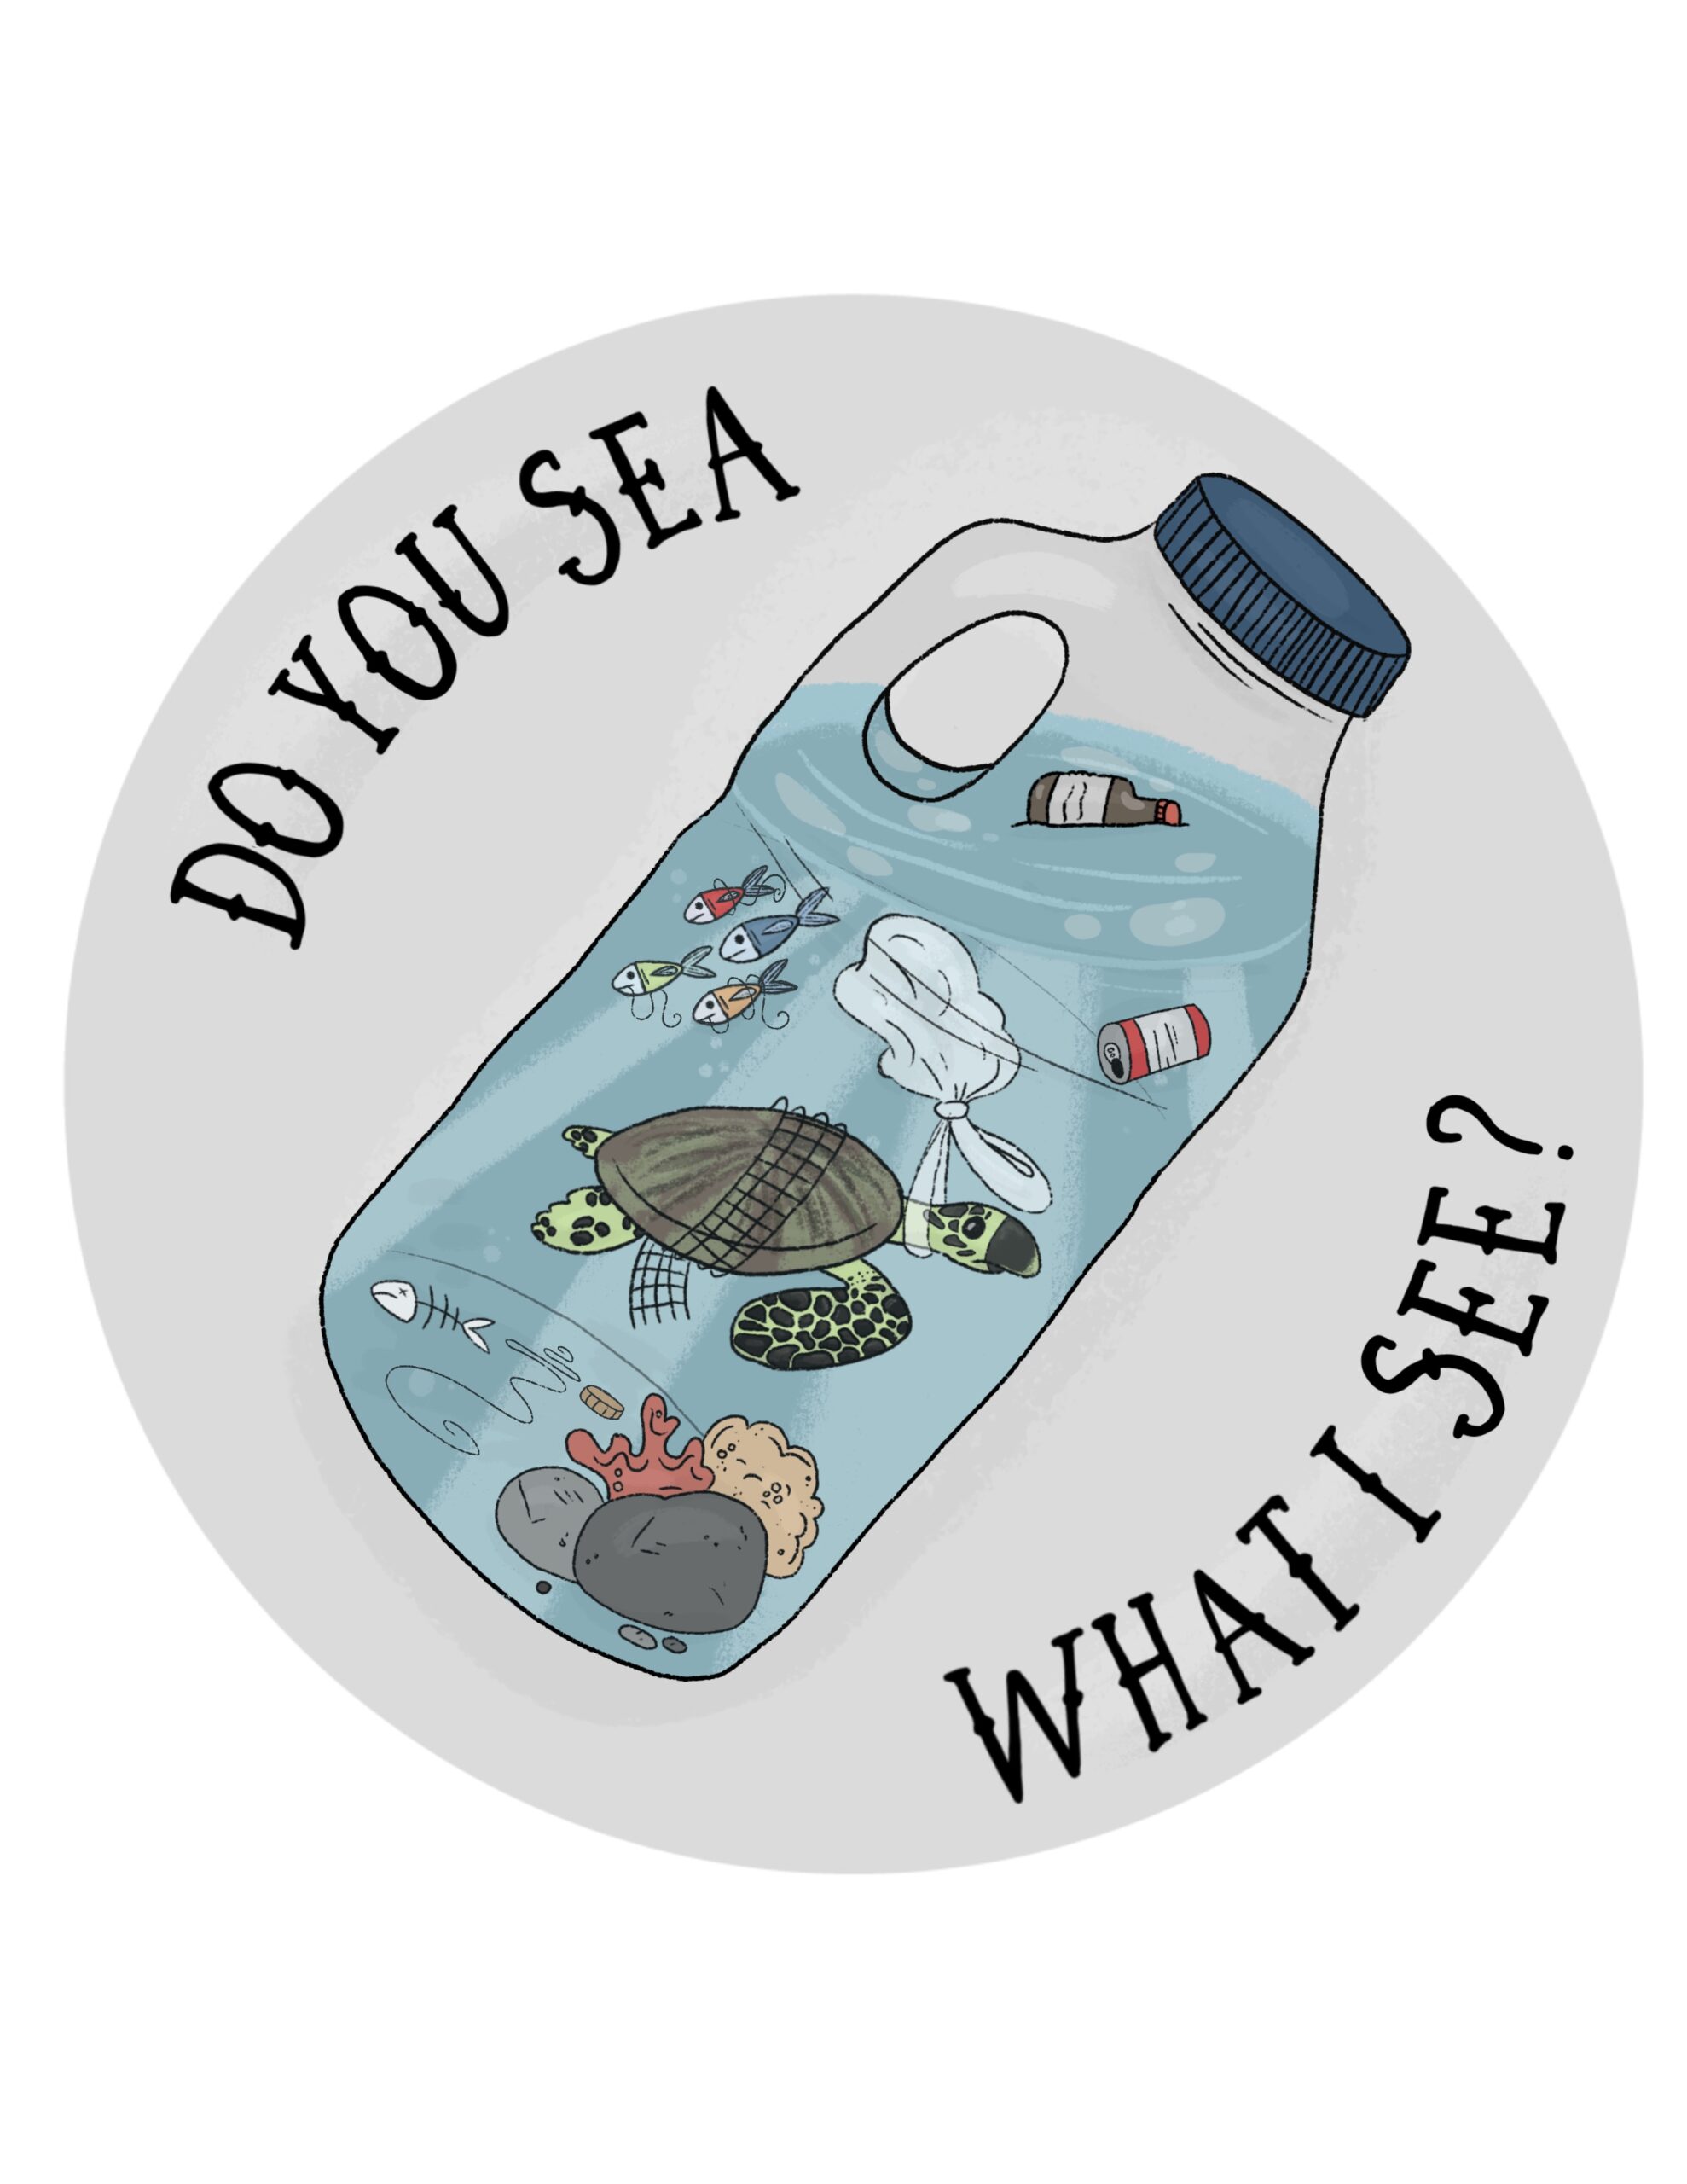 Child’s drawing with a circle outline and slogan saying ‘do you sea what I see?’ and a plastic milk carton with water filling it up and plastic pollution items such as bags, cans and bottles inside it as well as a turtle with some plastic caught on it.